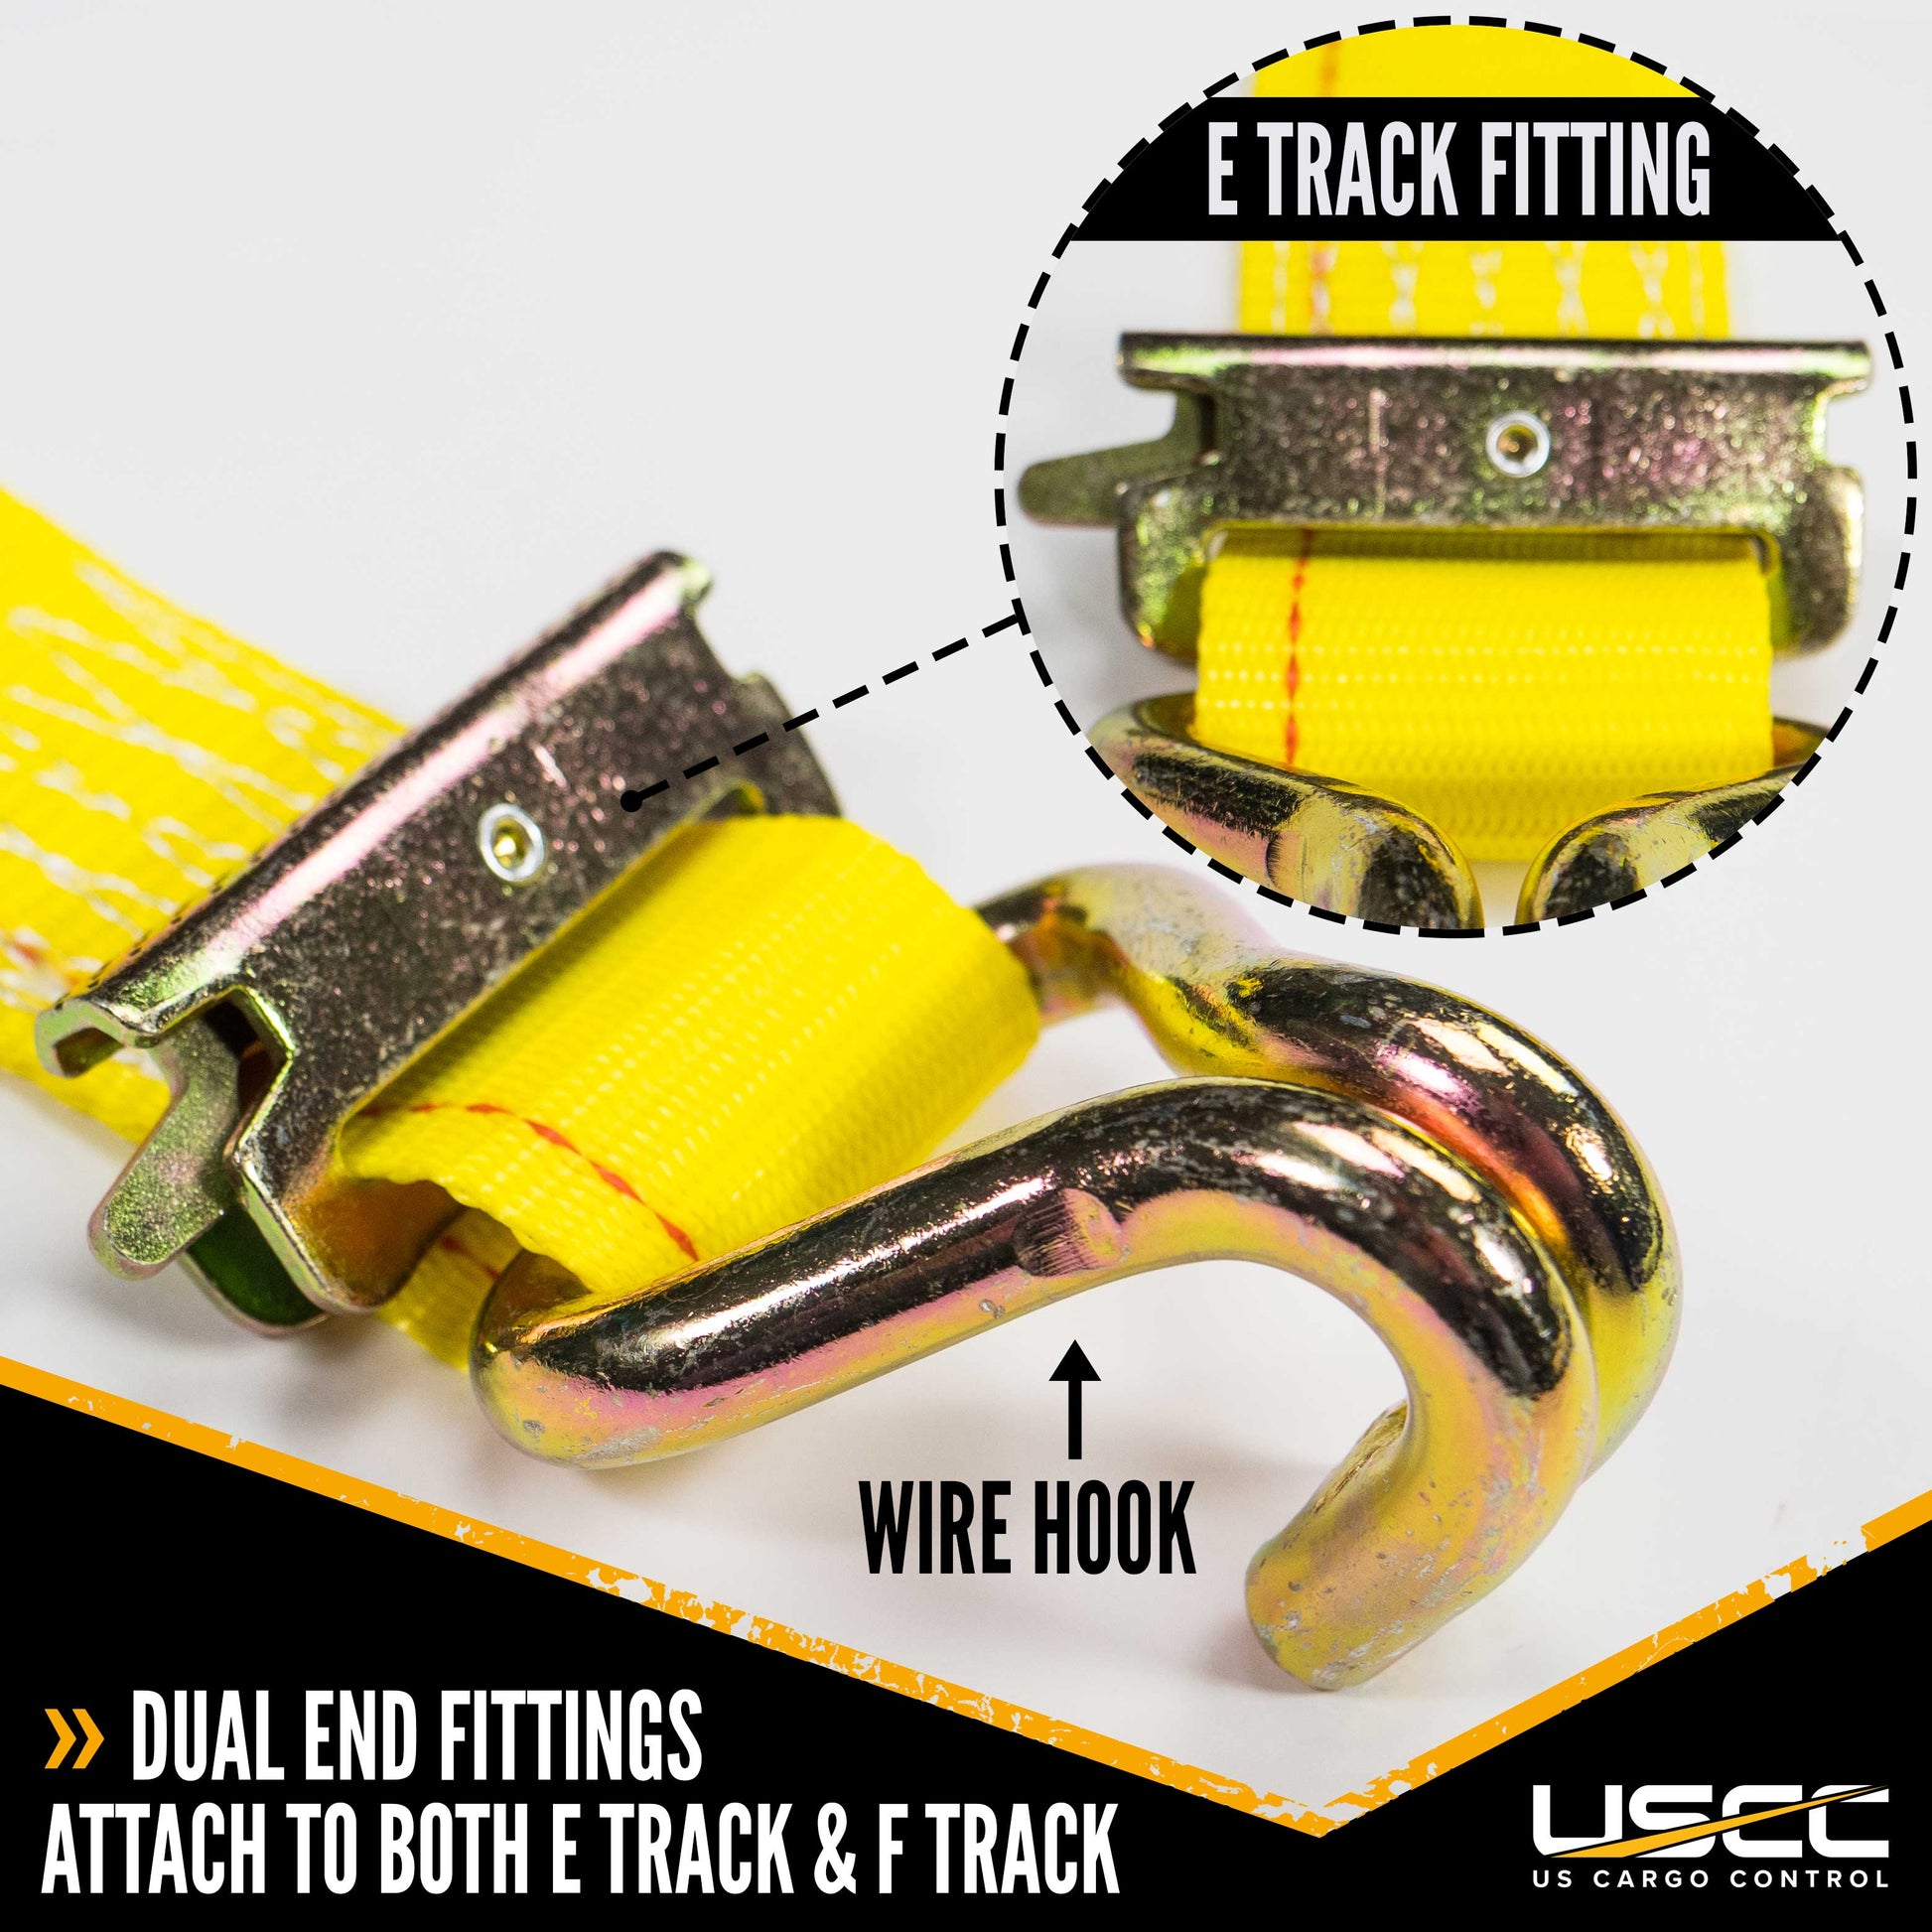 2 foot foot X 12 foot Yellow ETrack Straps wSpring EFittings and Wire Hooks image 4 of 10